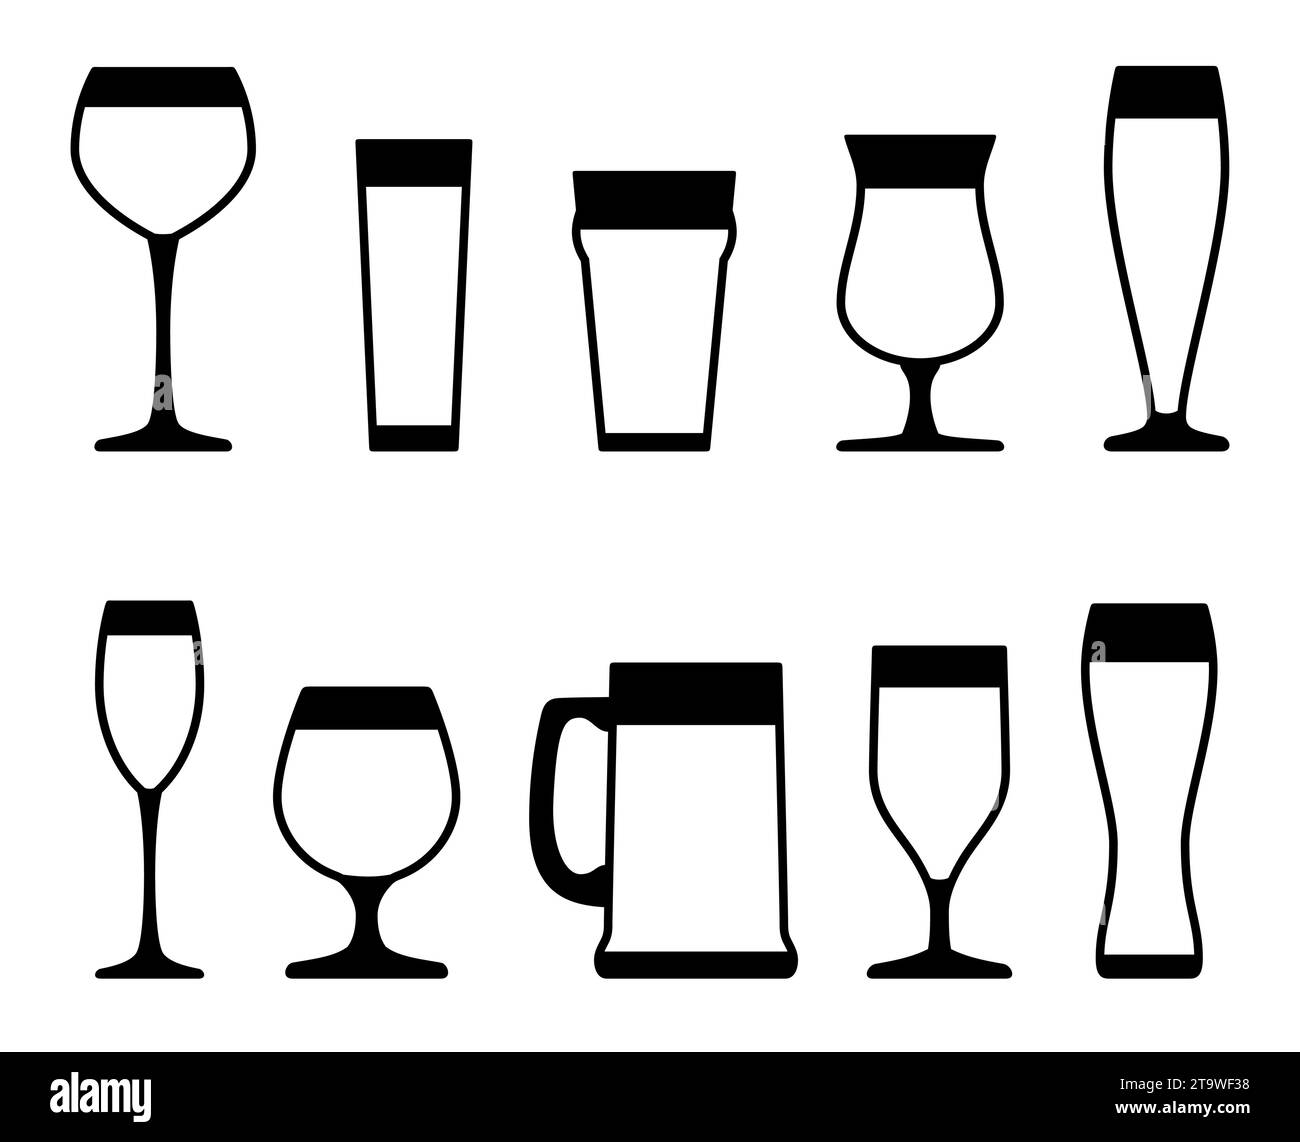 Beer glasses and mugs icons set. Alcoholic beverage menu collection set. Labeled visualization with various glasses styles for lager, pilsner. Stock Vector